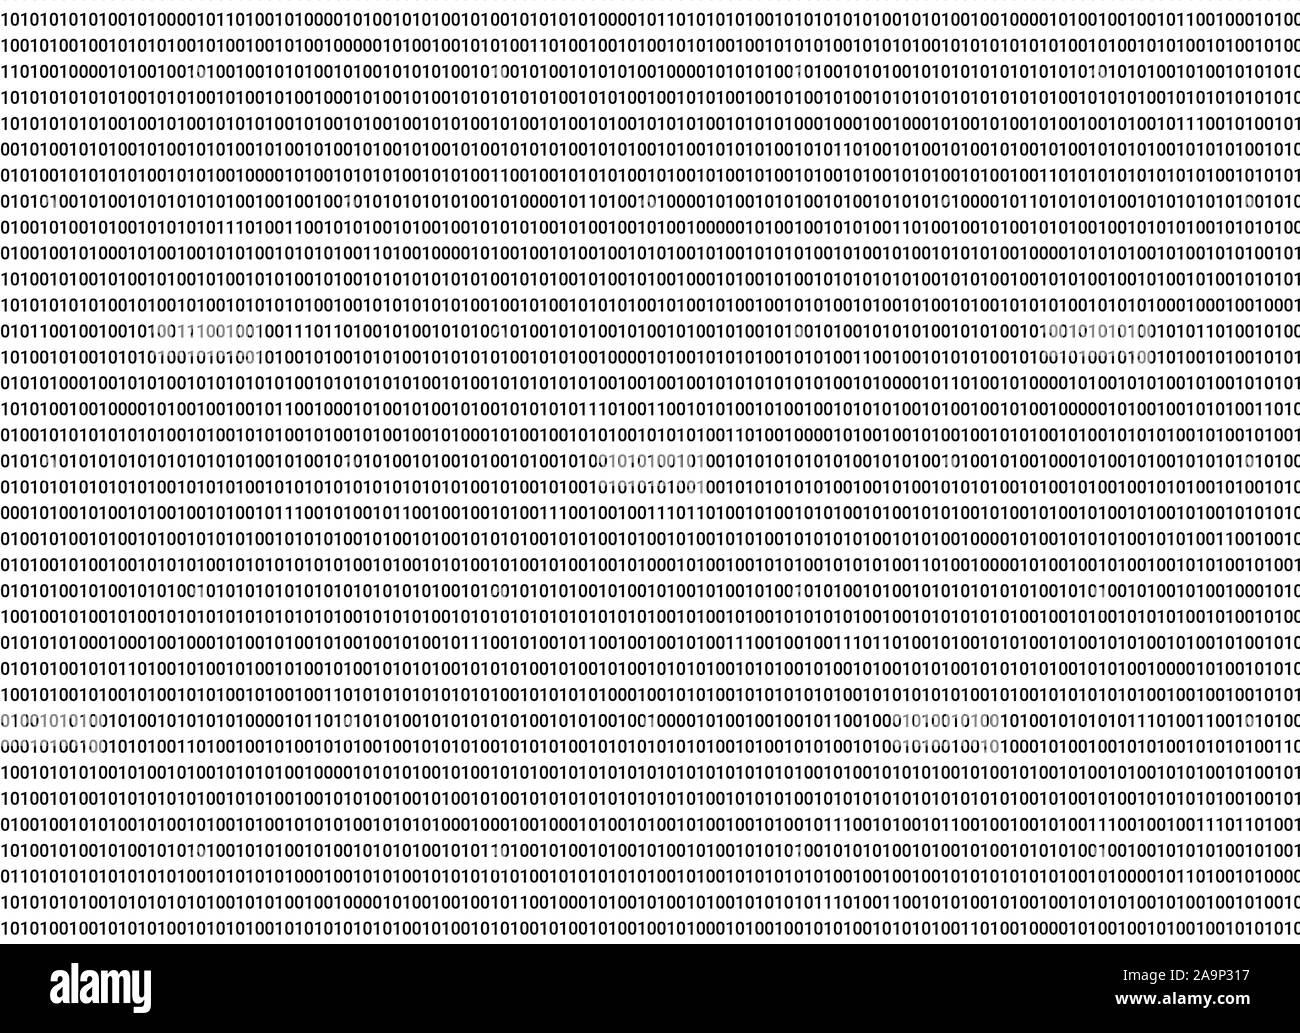 Binary computer data background with zero and one numbers. Digits 1 and 0 Stock Photo